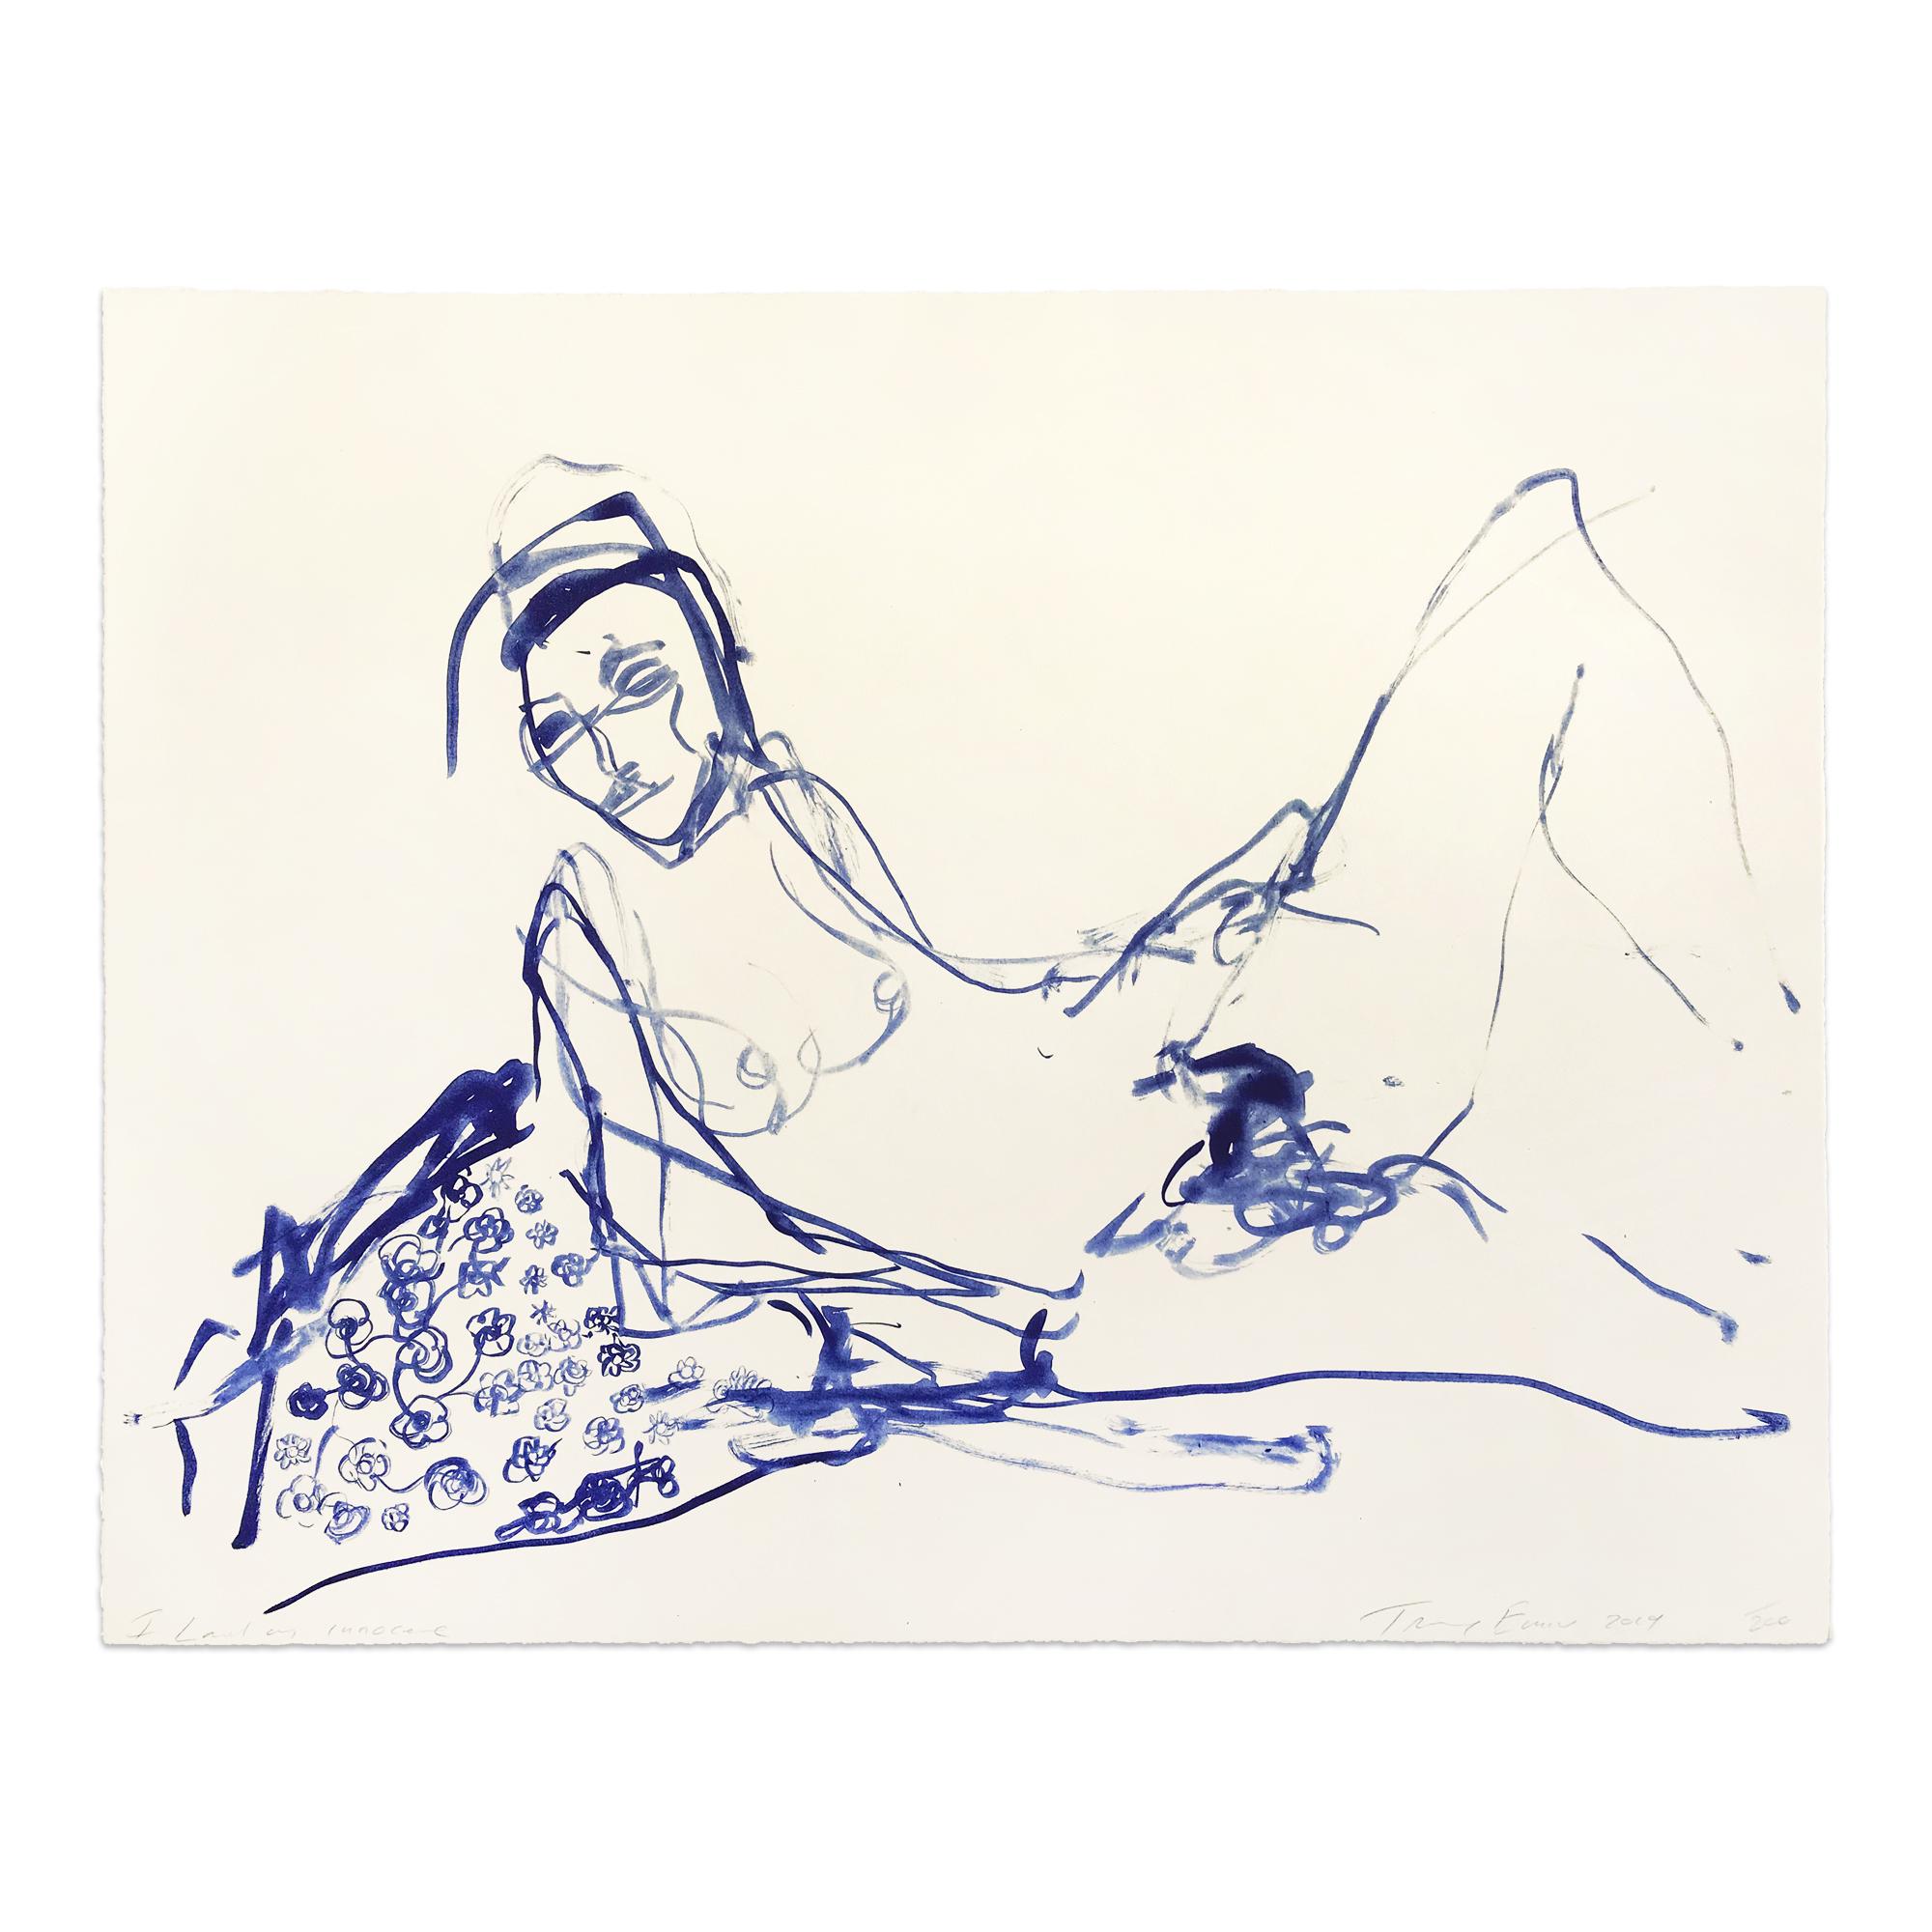 Tracey Emin Nude Print - I Loved My Innocence, Young British Artist, Contemporary Art, 21st Century